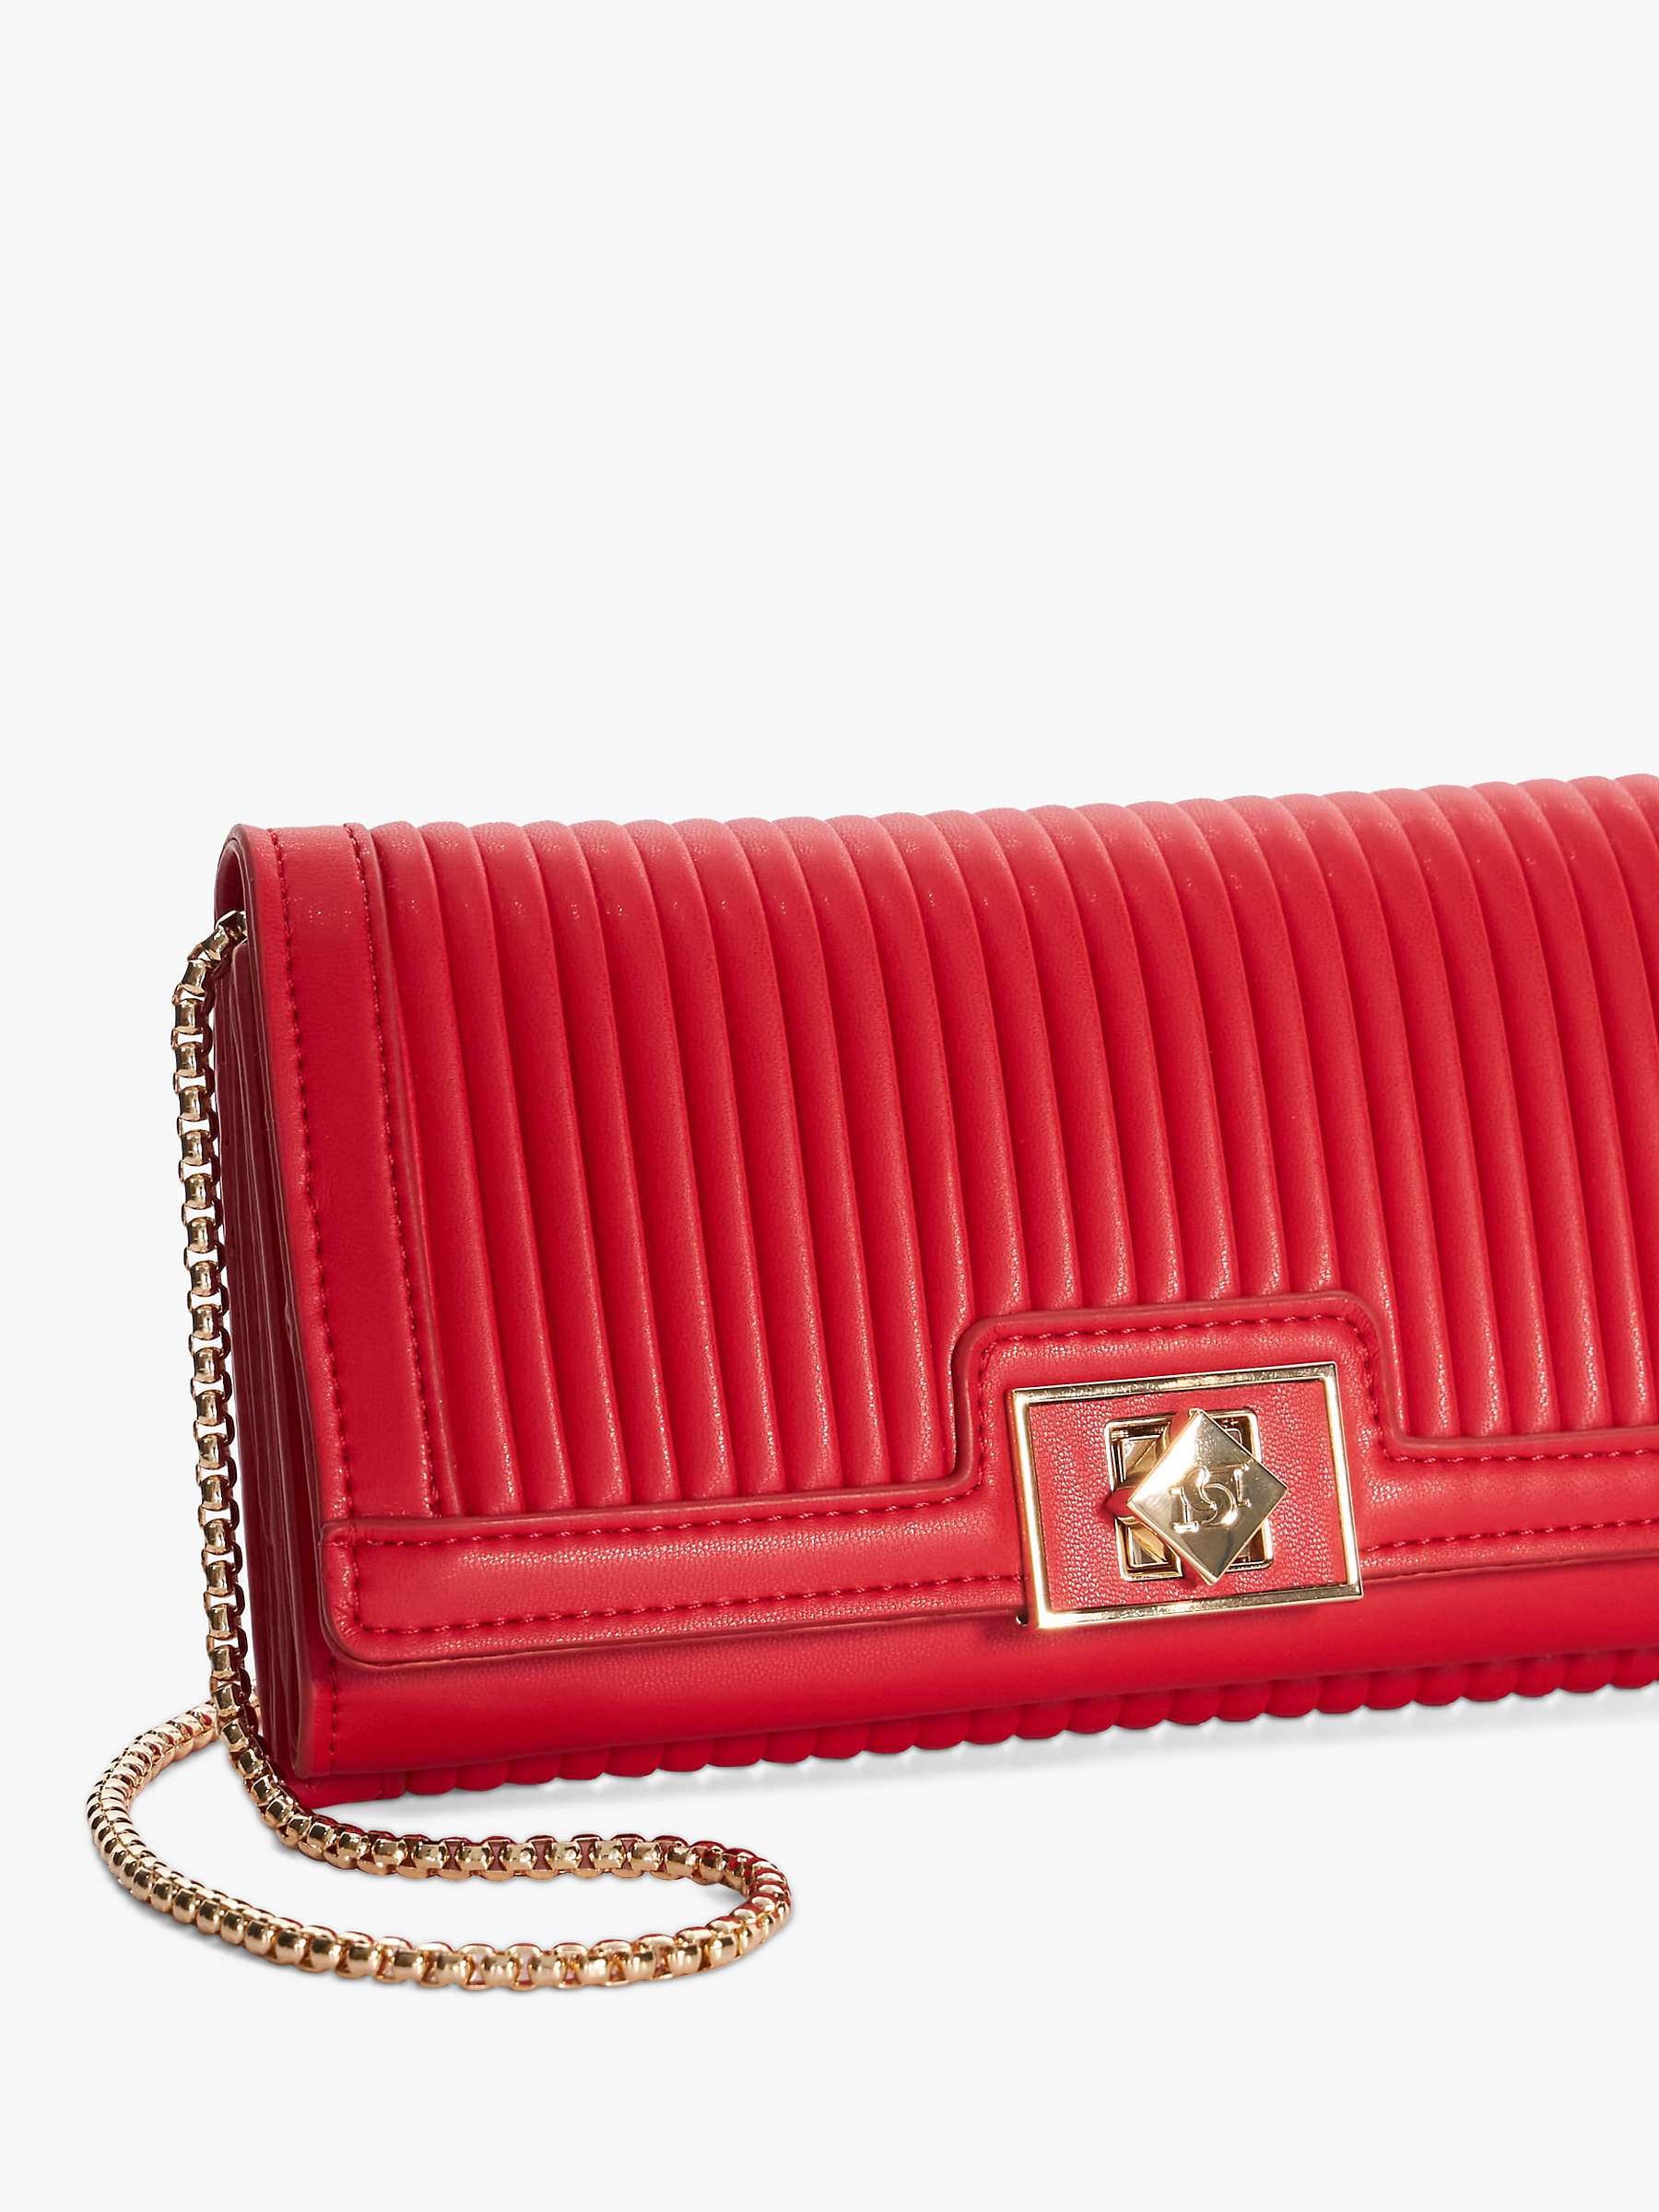 Buy Dune Serenities Pleated Clutch Bag, Red Online at johnlewis.com